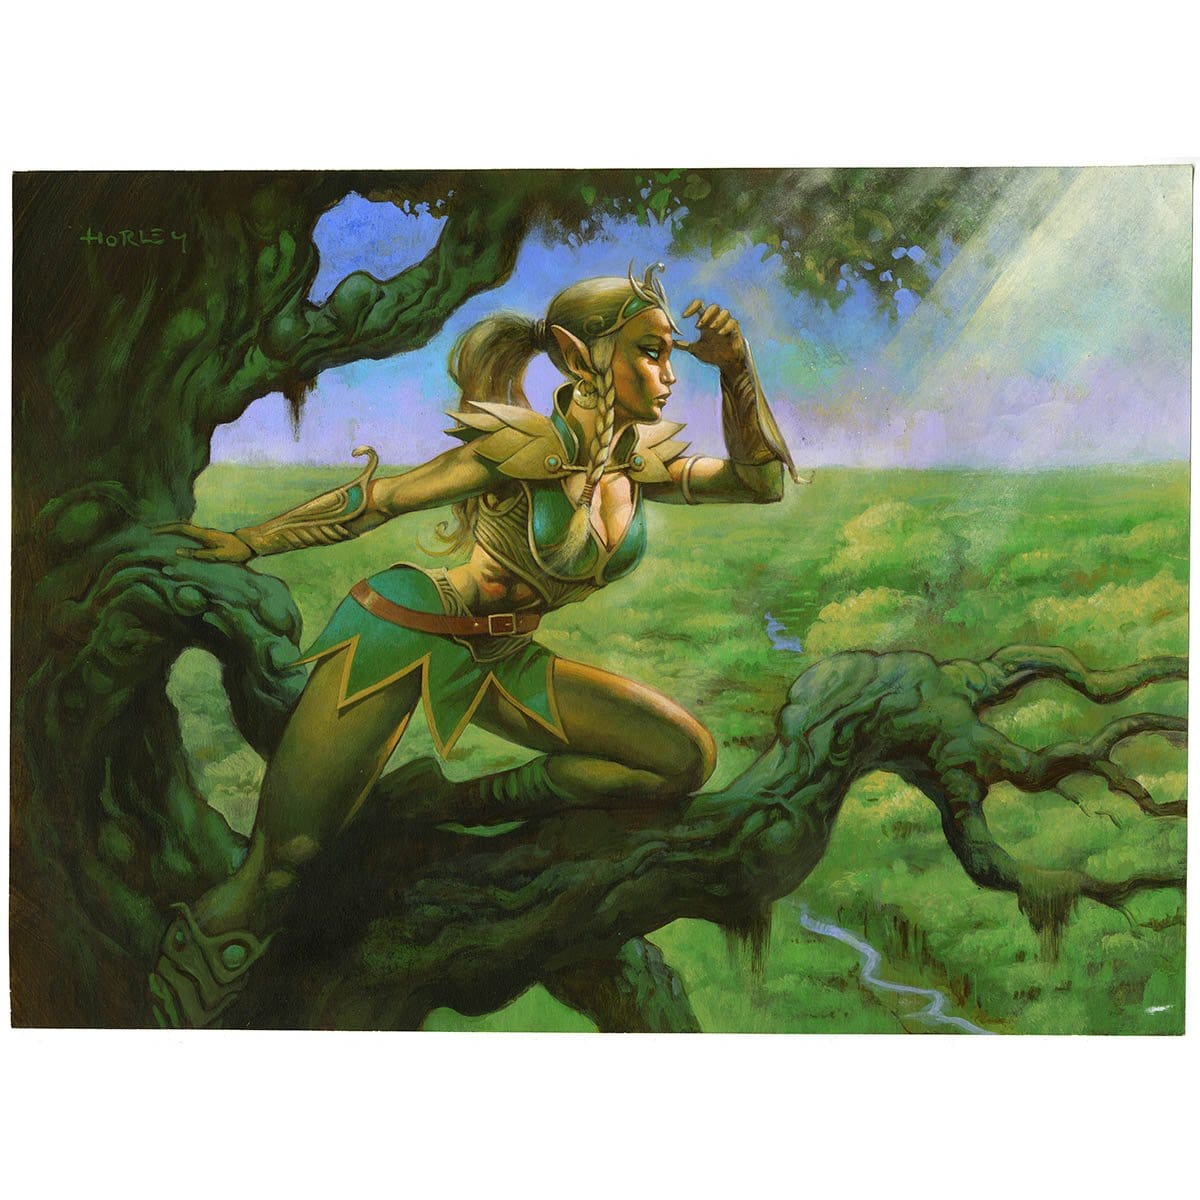 Seeker of Skybreak Print - Print - Original Magic Art - Accessories for Magic the Gathering and other card games